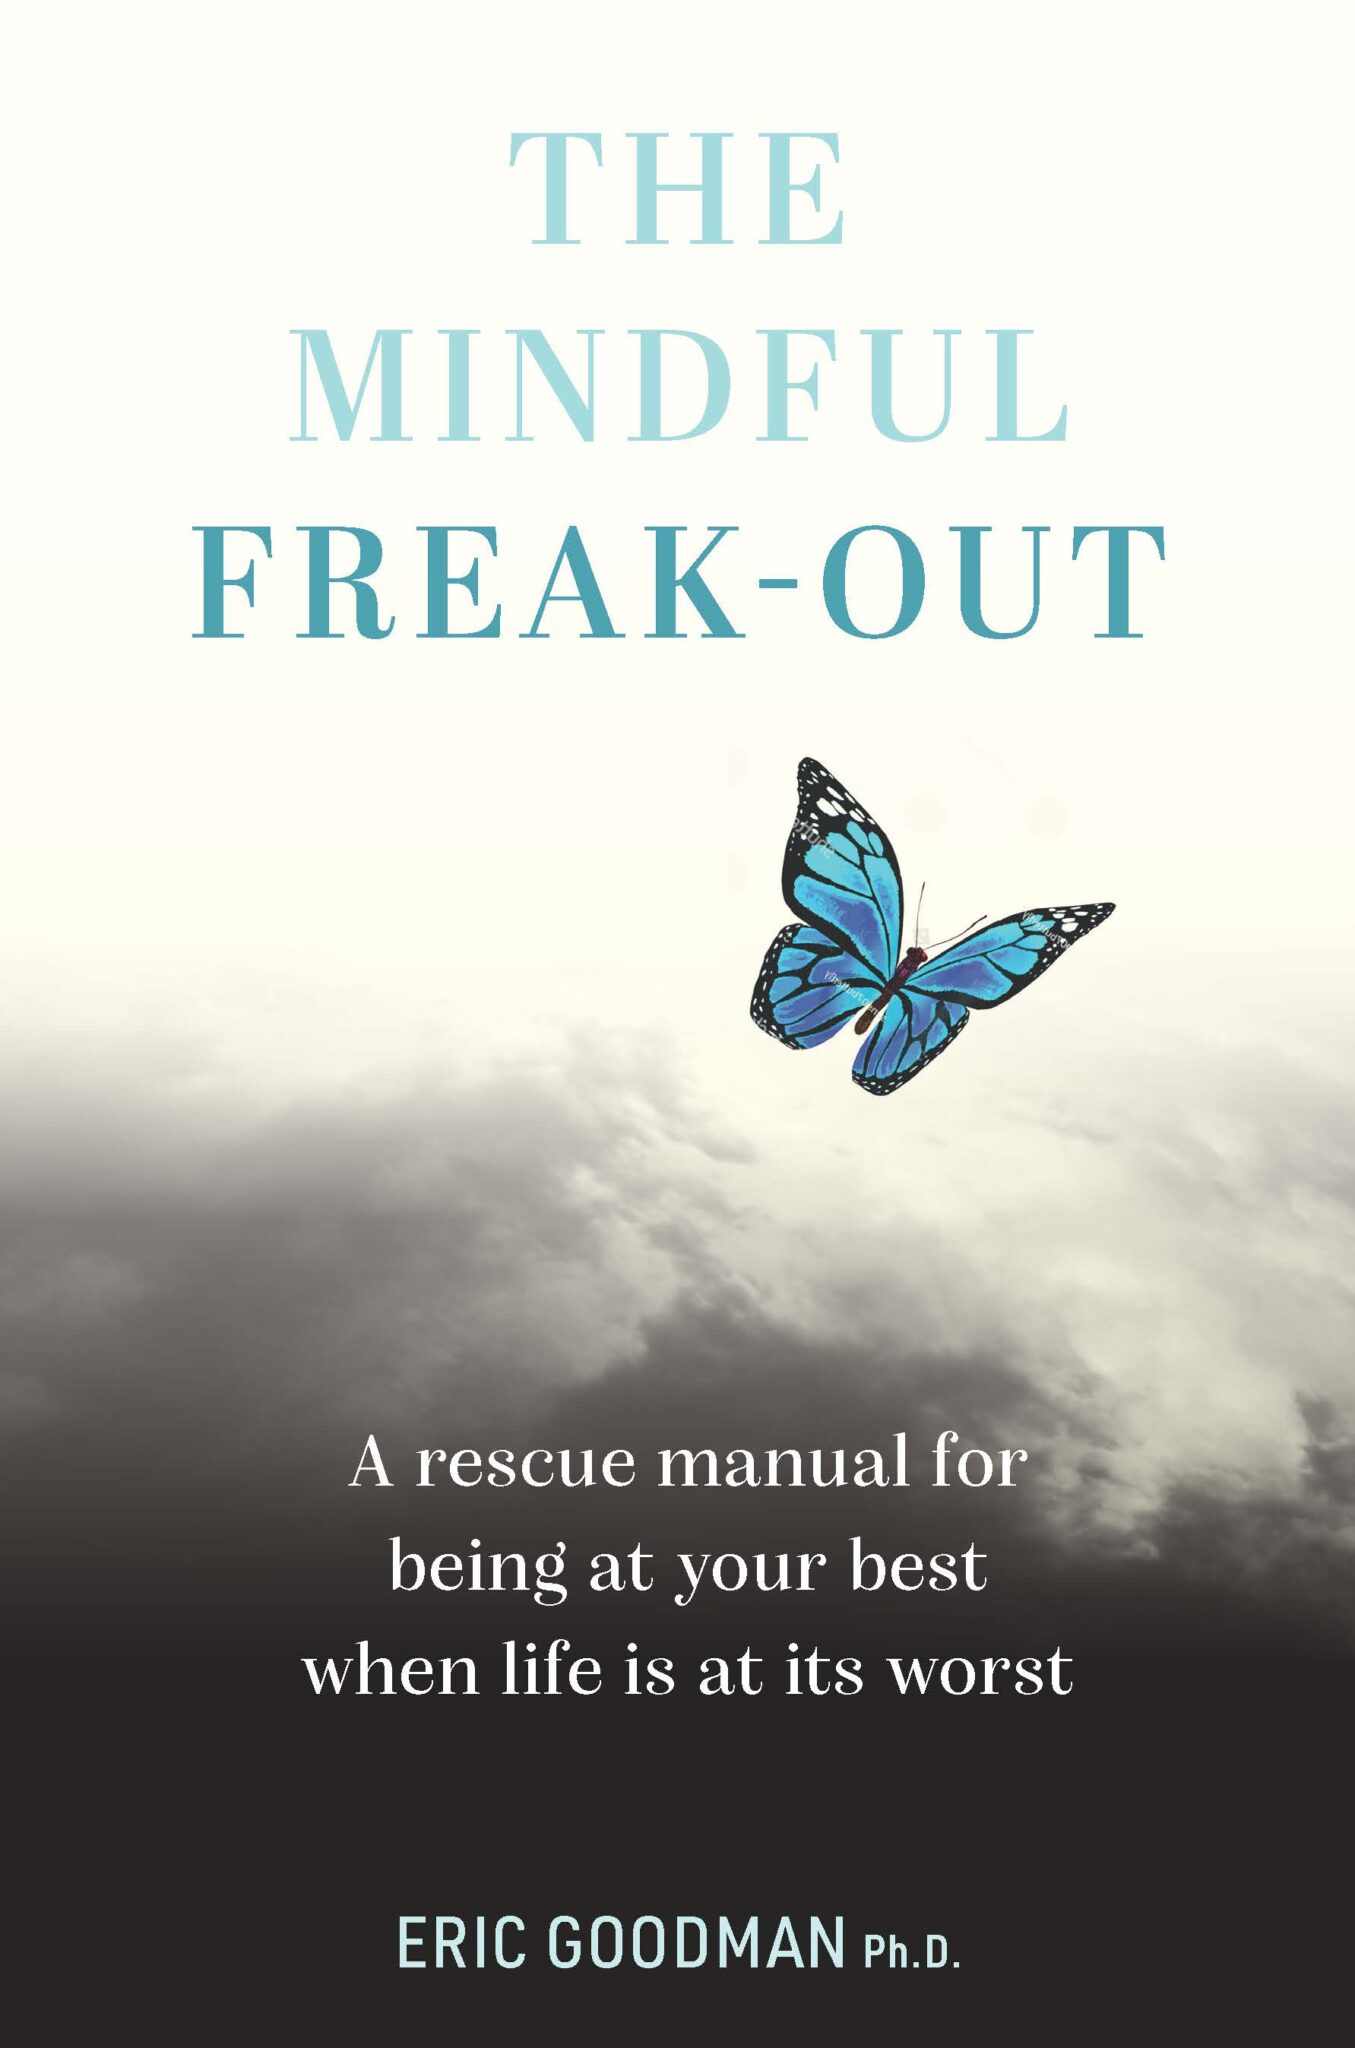 The Mindful Freak-out